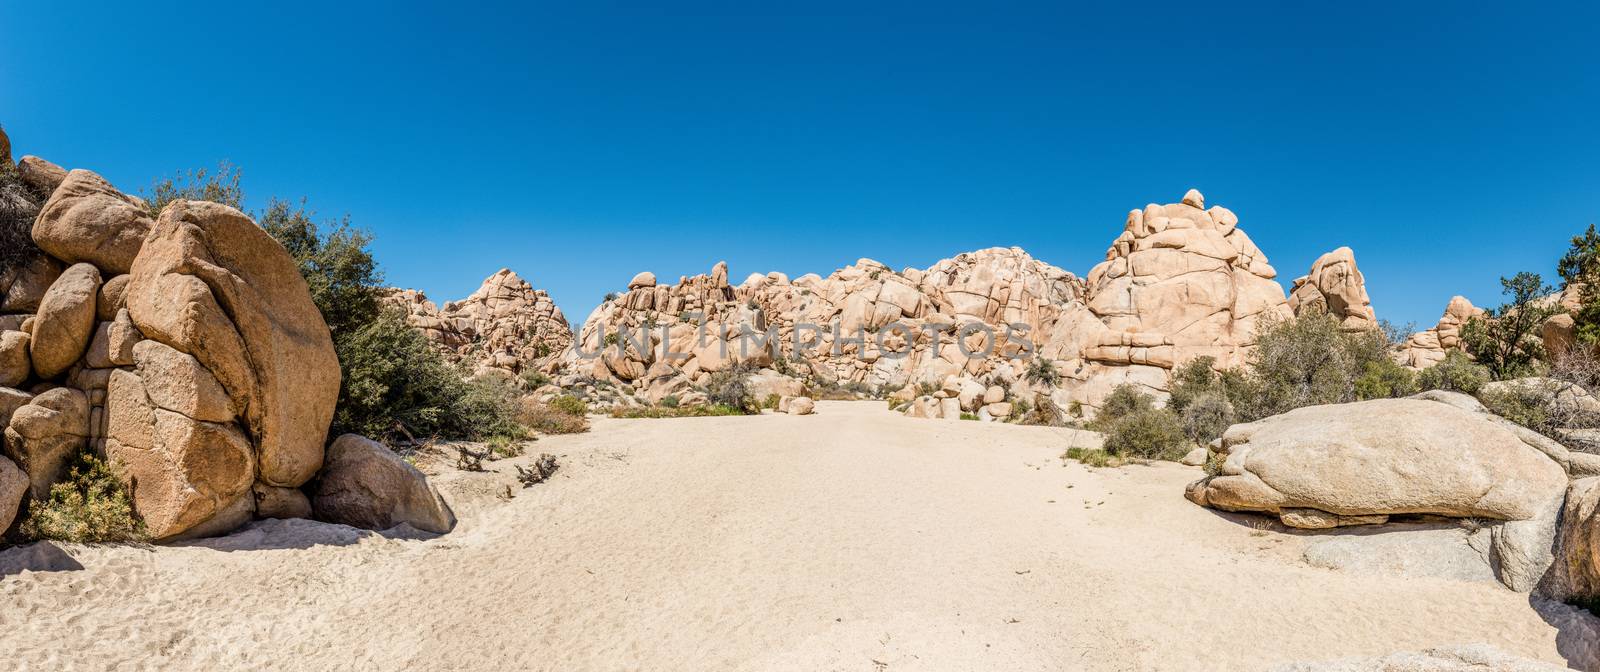 Panorama of granite boulders in the Wonderland of Rocks area along Willow Hole Trail in Joshua Tree National Park, California